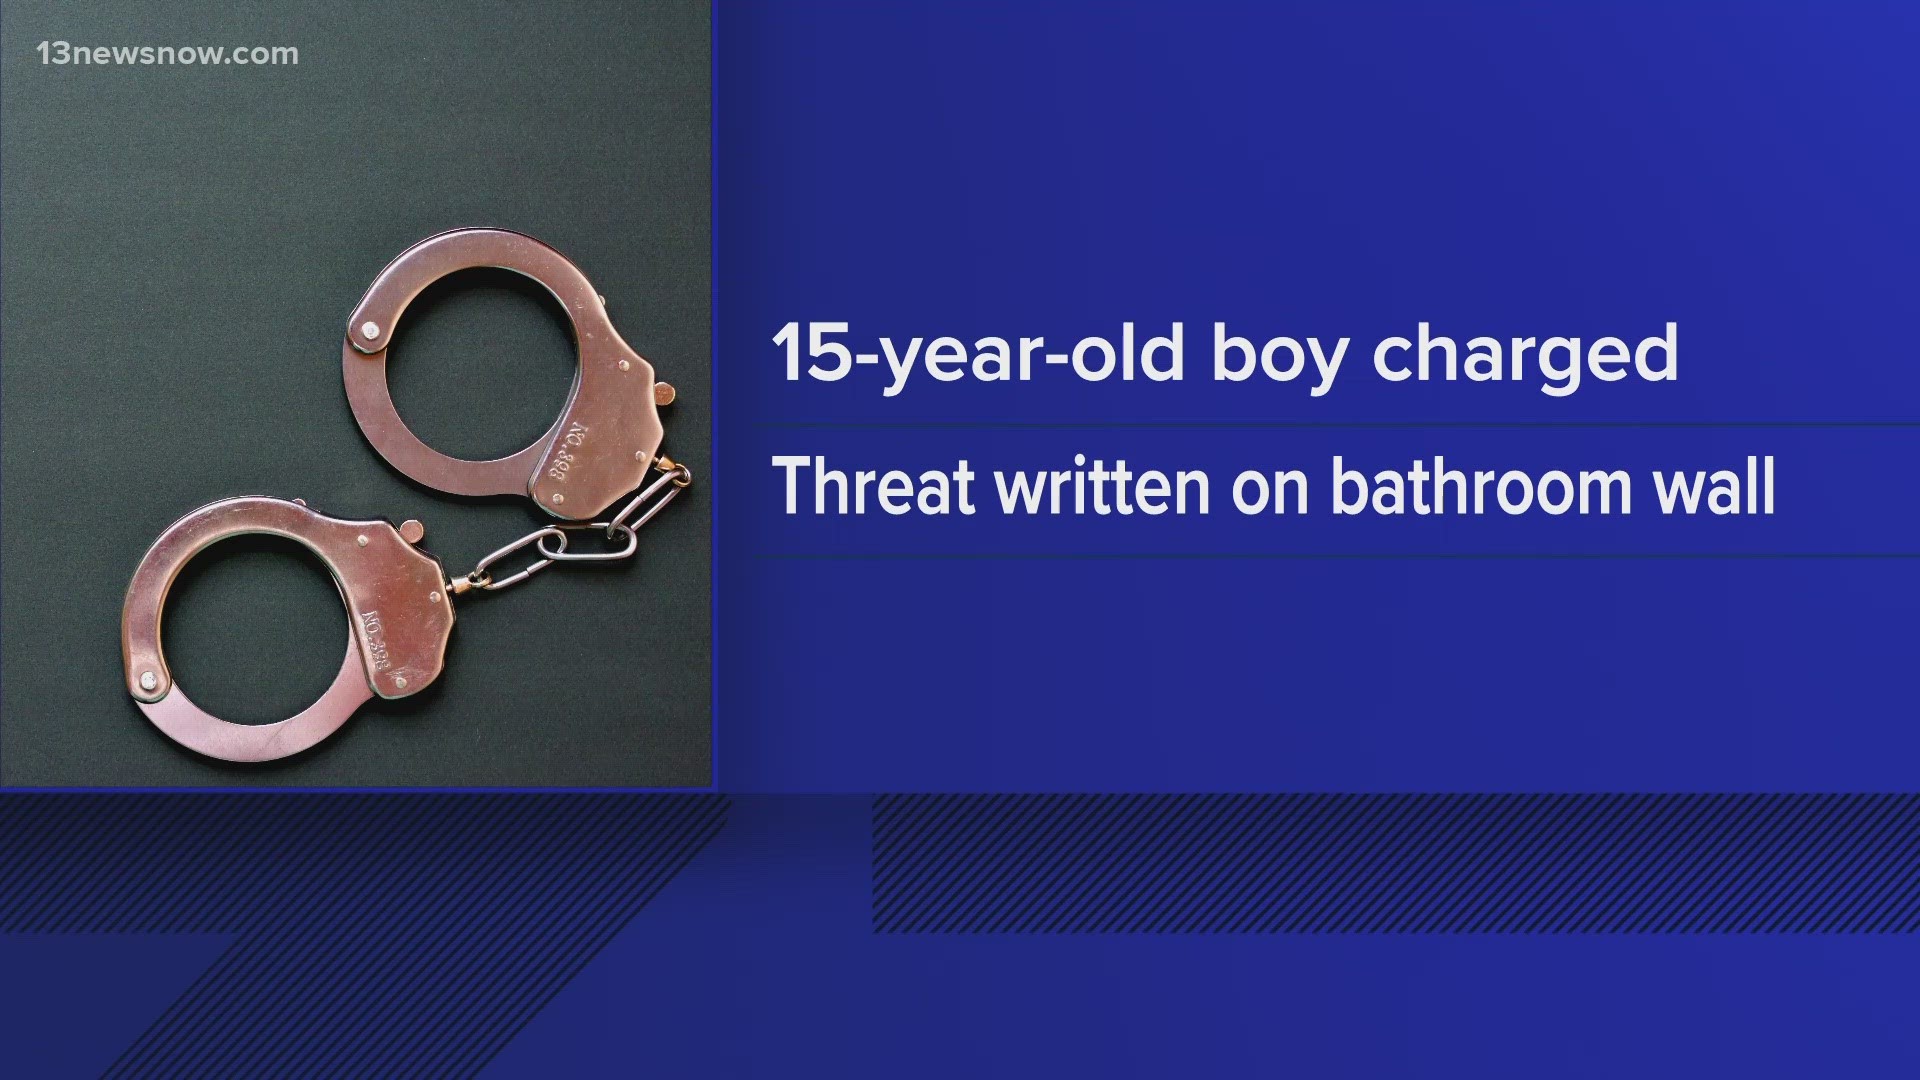 The boy faces several charges, including making threats on school property.